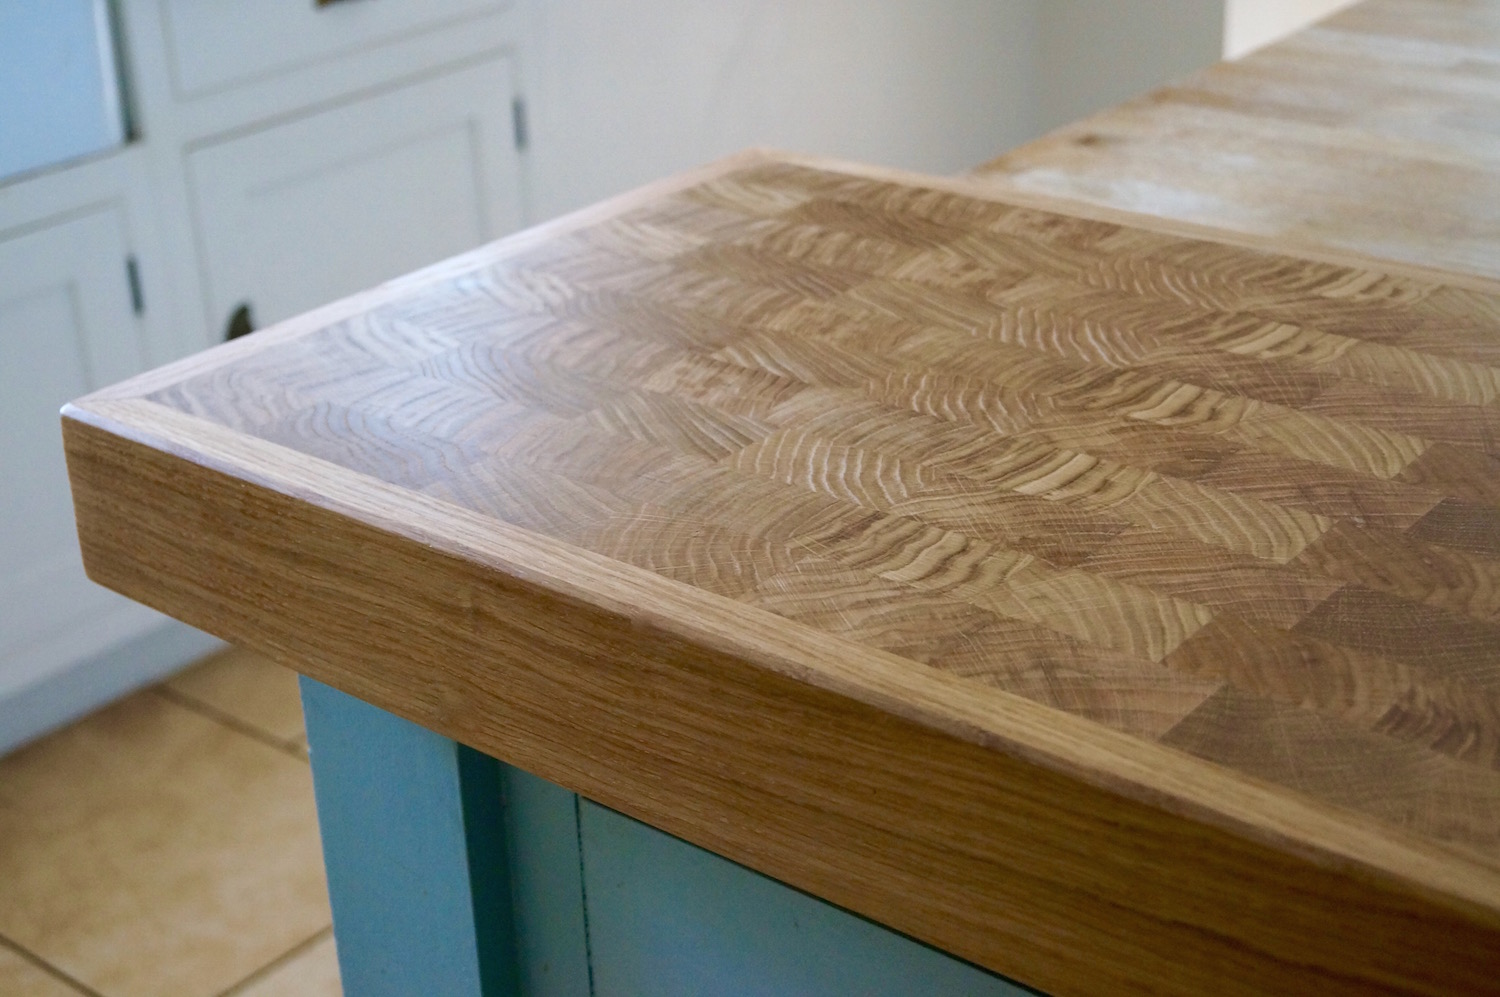 end-grain-cutting-board-with-frame-makemesomethingspecial.com